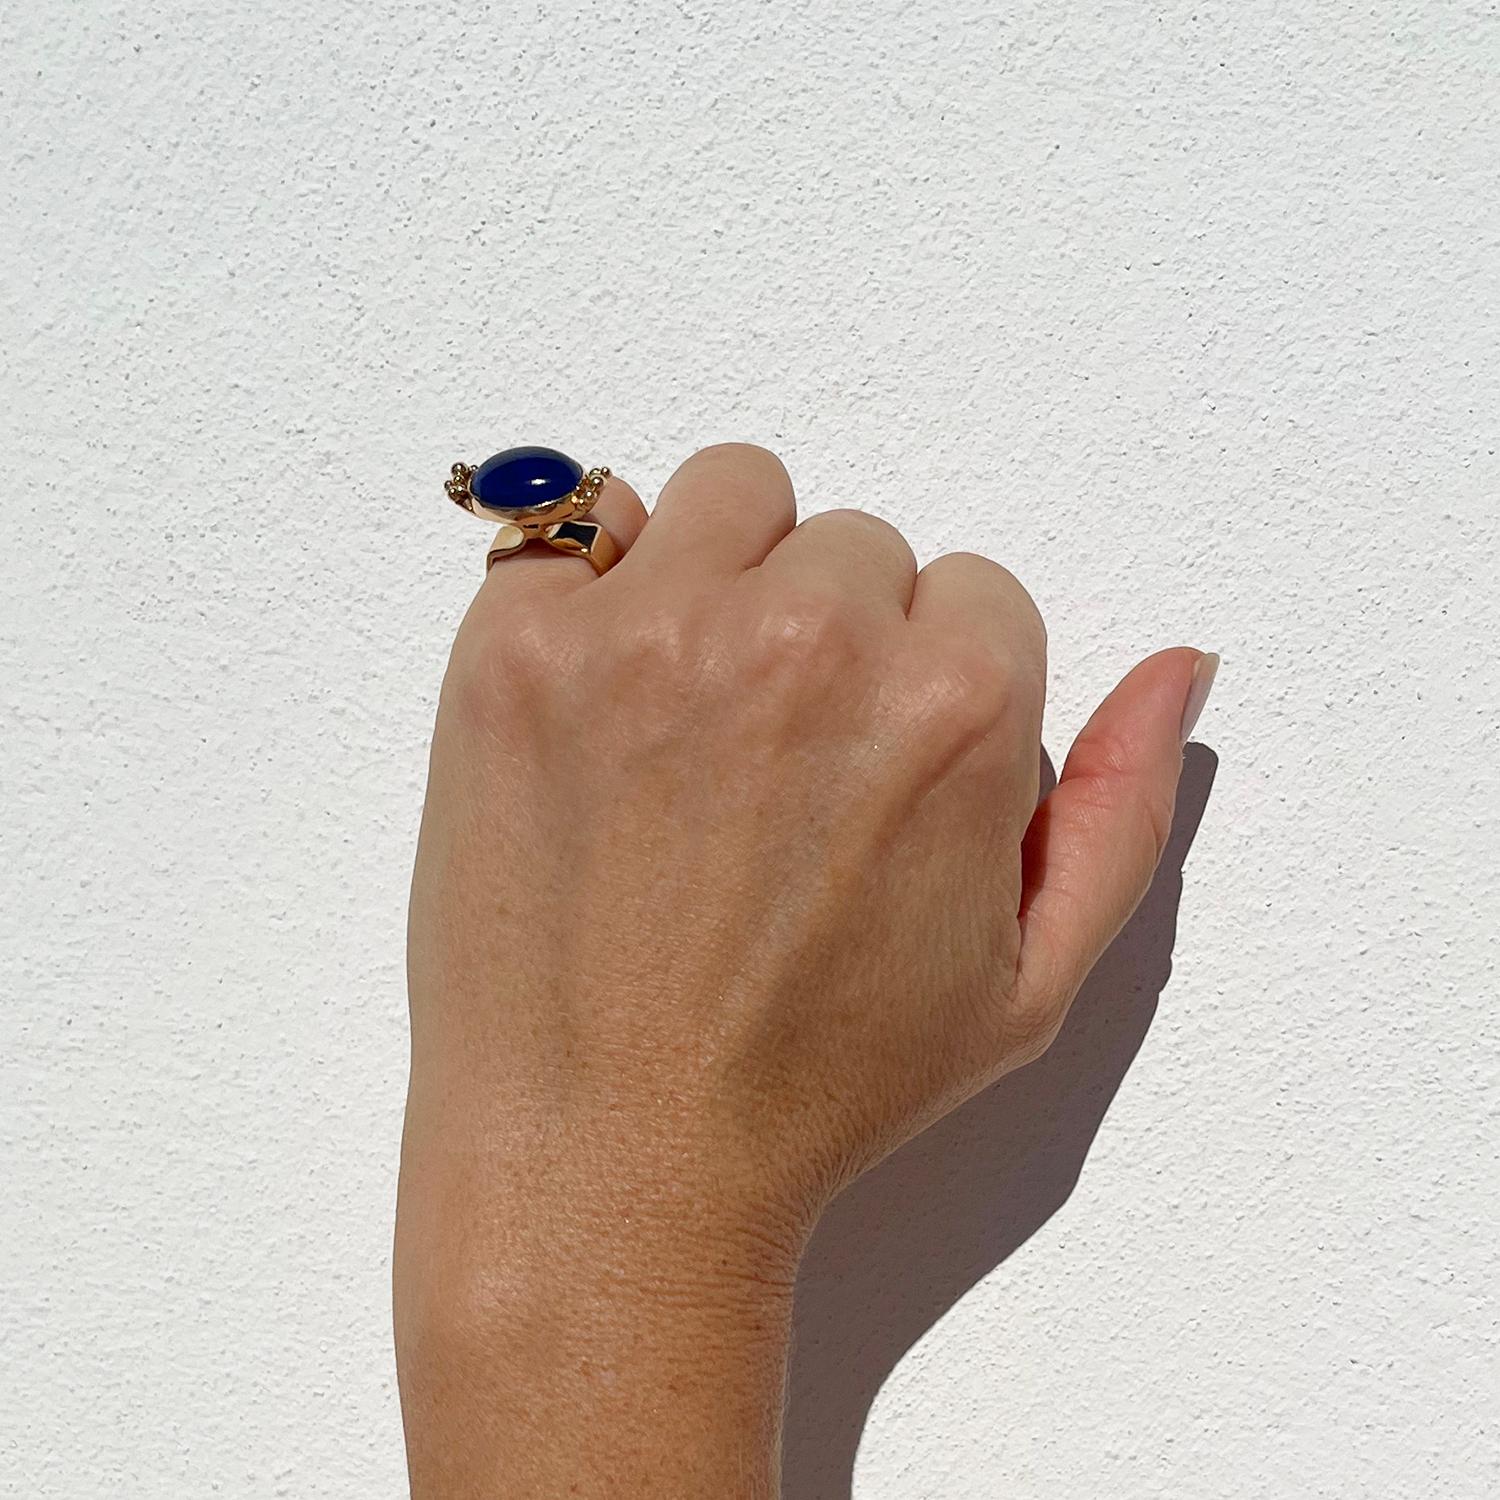 18 K Gold Ring with a Cabochon Cut Lapis Lazuli Stone, Made in 1972 For Sale 10